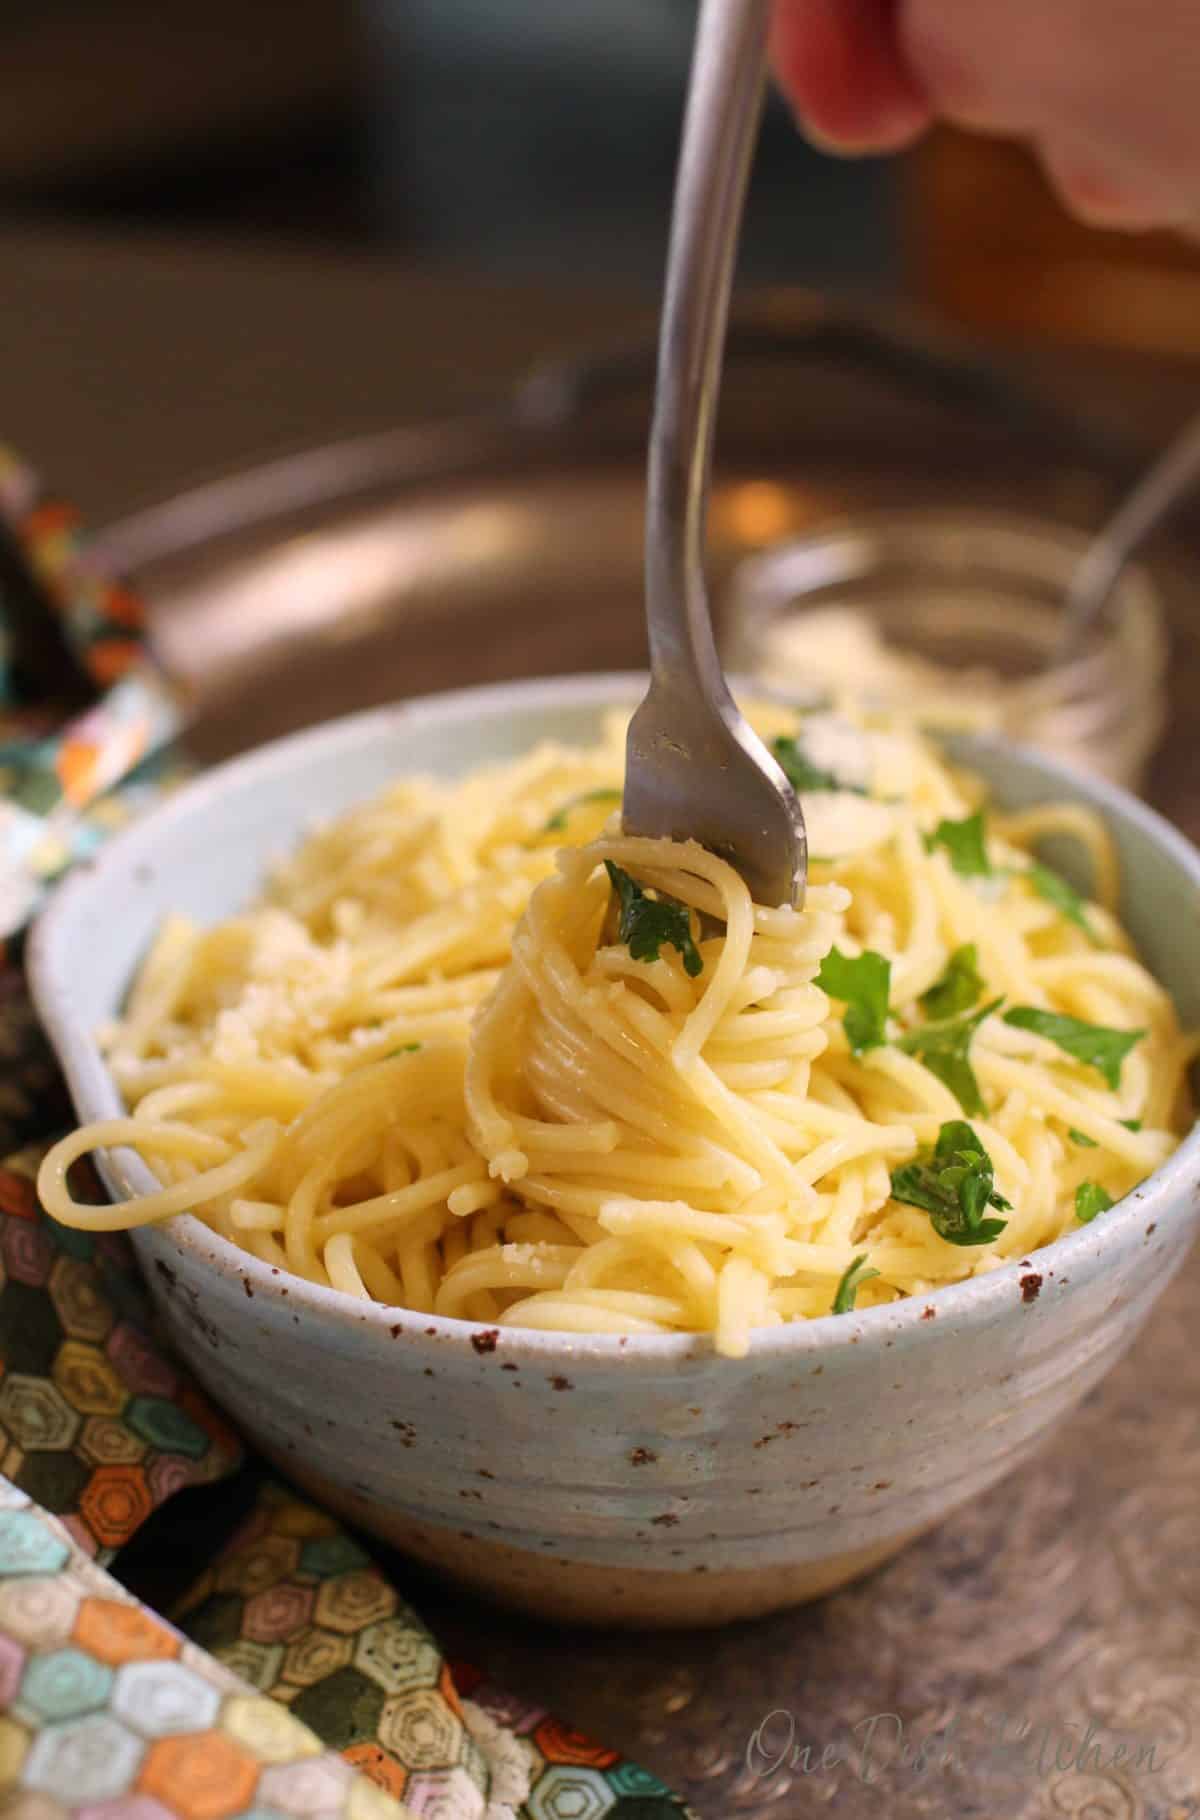 Pasta twirled on a fork from a bowl of pasta topped with parmesan cheese and chopped parsley.